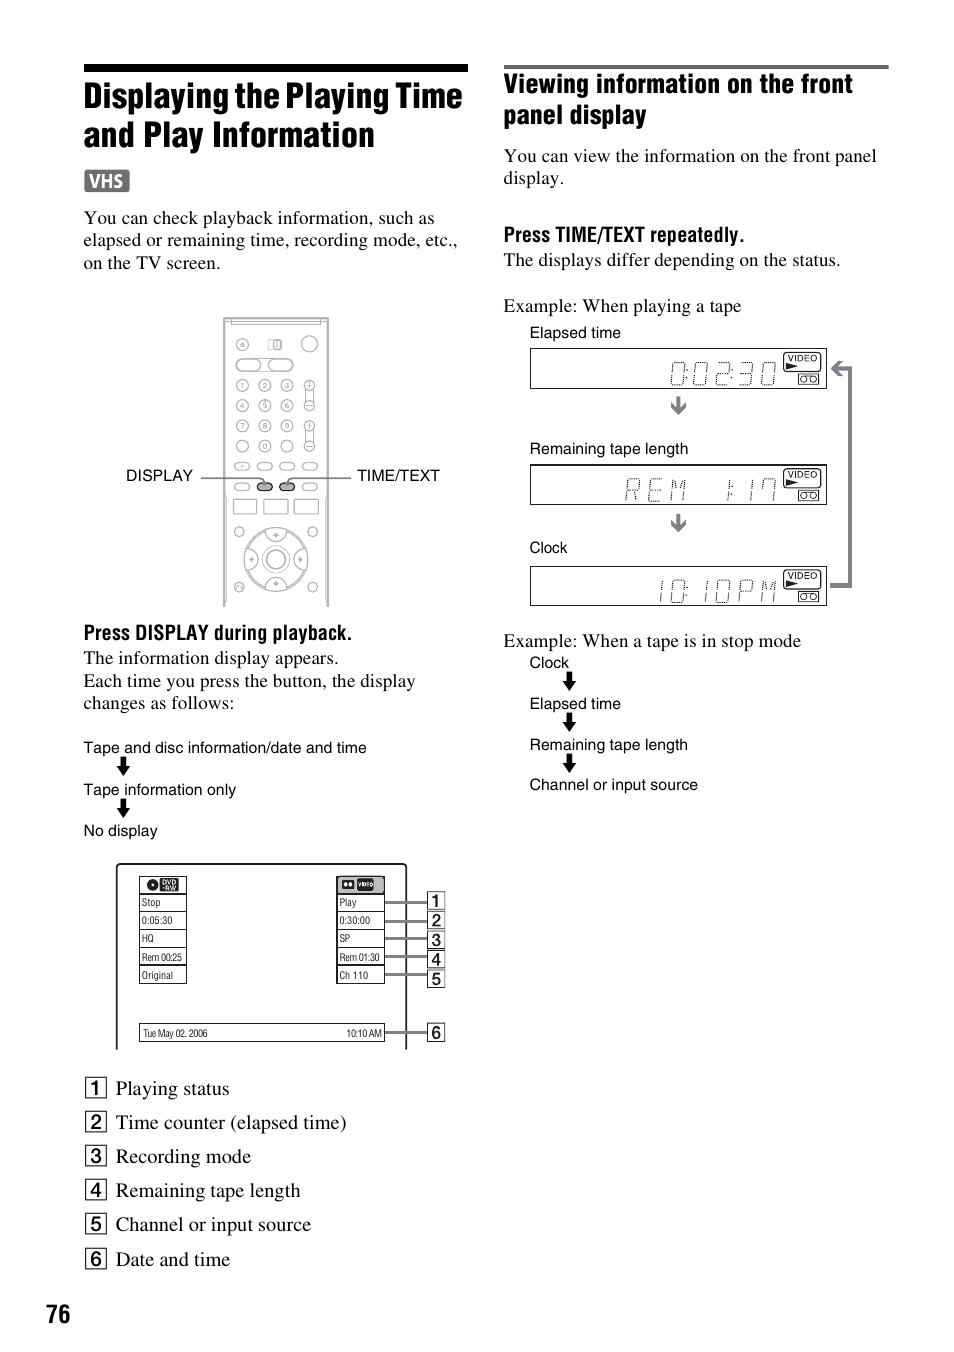 Displaying the playing time and play information, Viewing information on the front panel display, Press display during playback | Press time/text repeatedly | Sony RDR-VX521 User Manual | Page 76 / 132